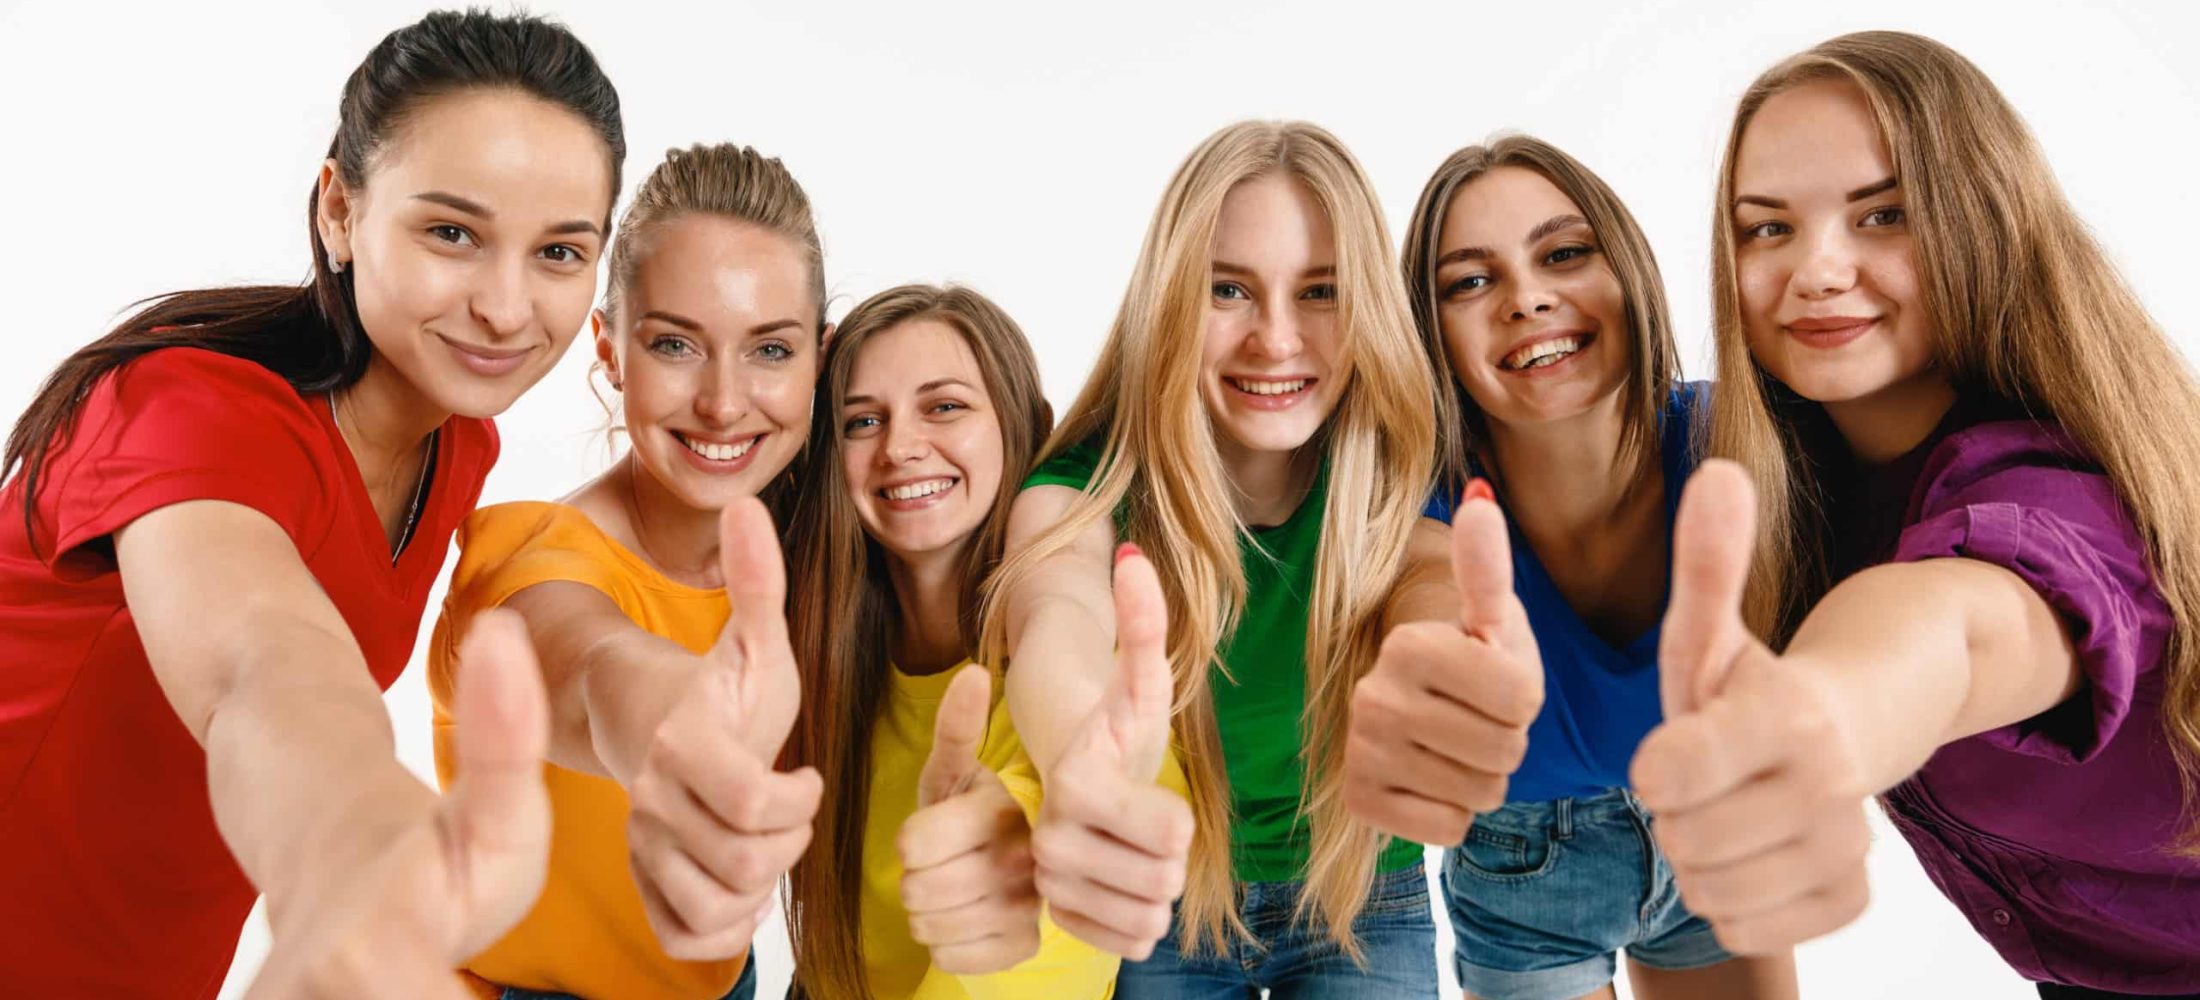 Young women weared in LGBT flag colors isolated on white background. Caucasian female models in bright shirts. Look happy, showing thumbs up. Trust LGBT pride, human rights, freedom of choice concept.